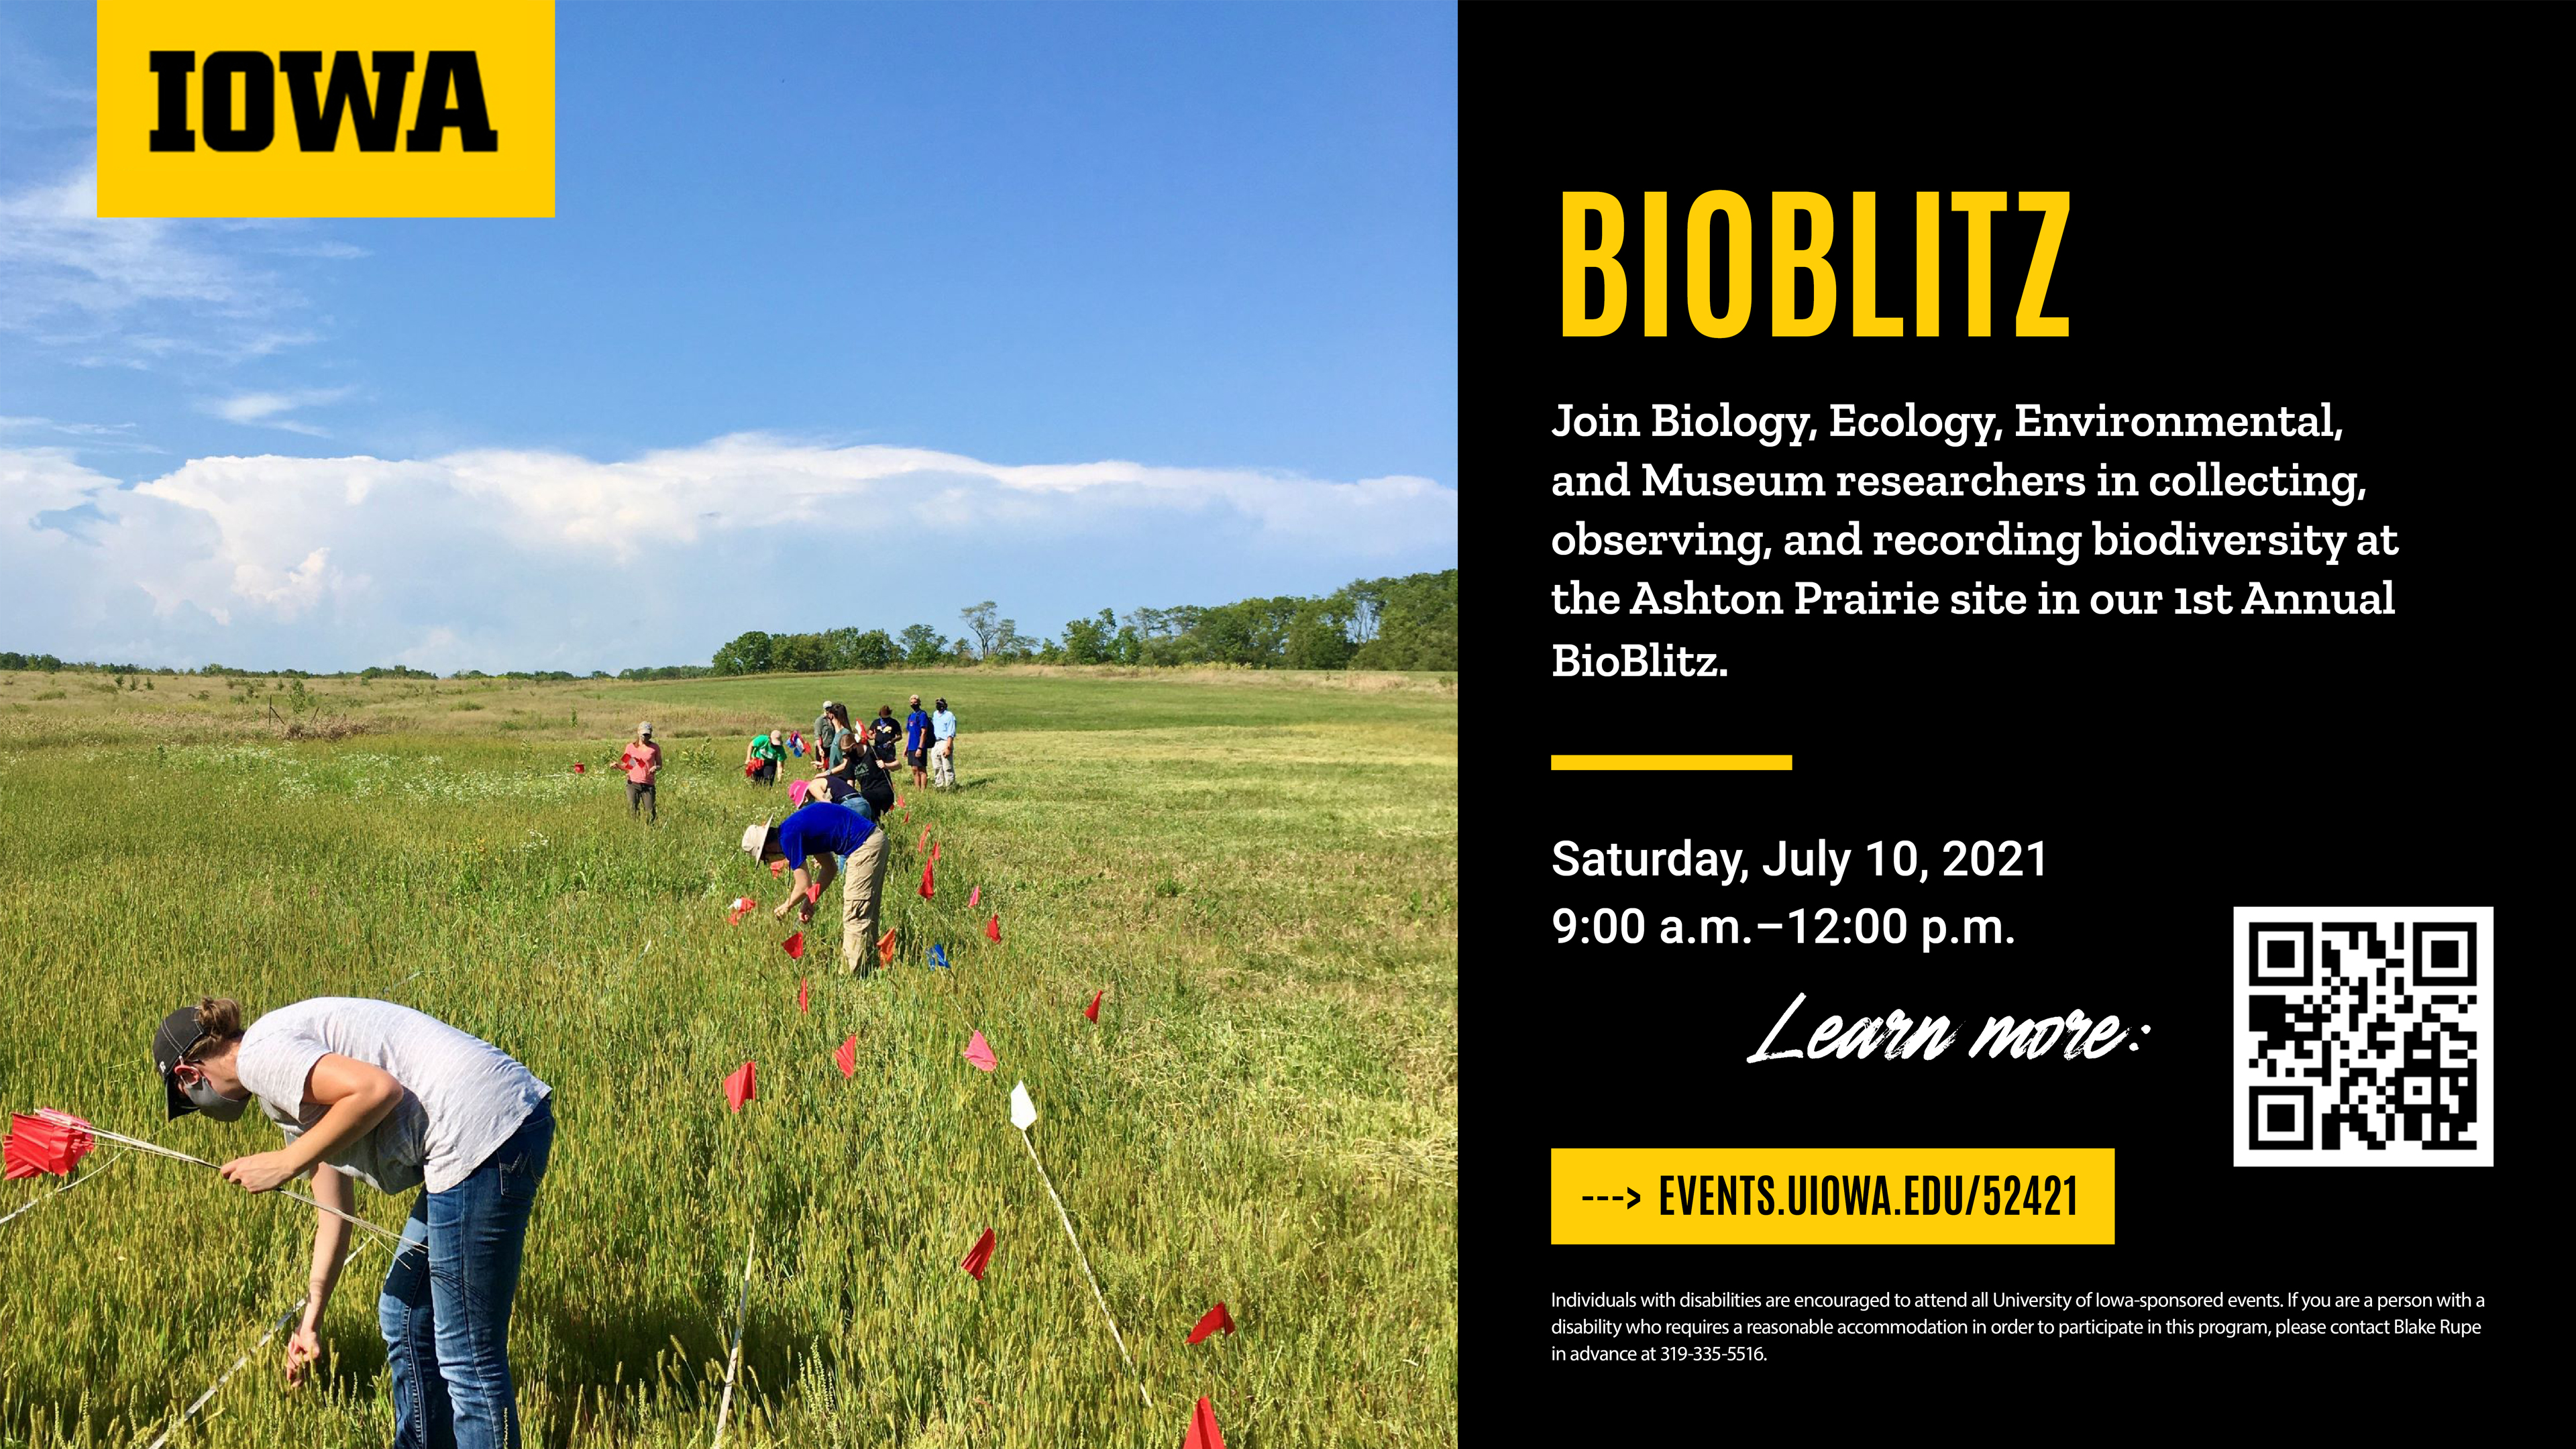 Join researchers in collecting, observing, and recording biodiversity at the Ashton Prairie site in our 1st Annual BioBlitz.